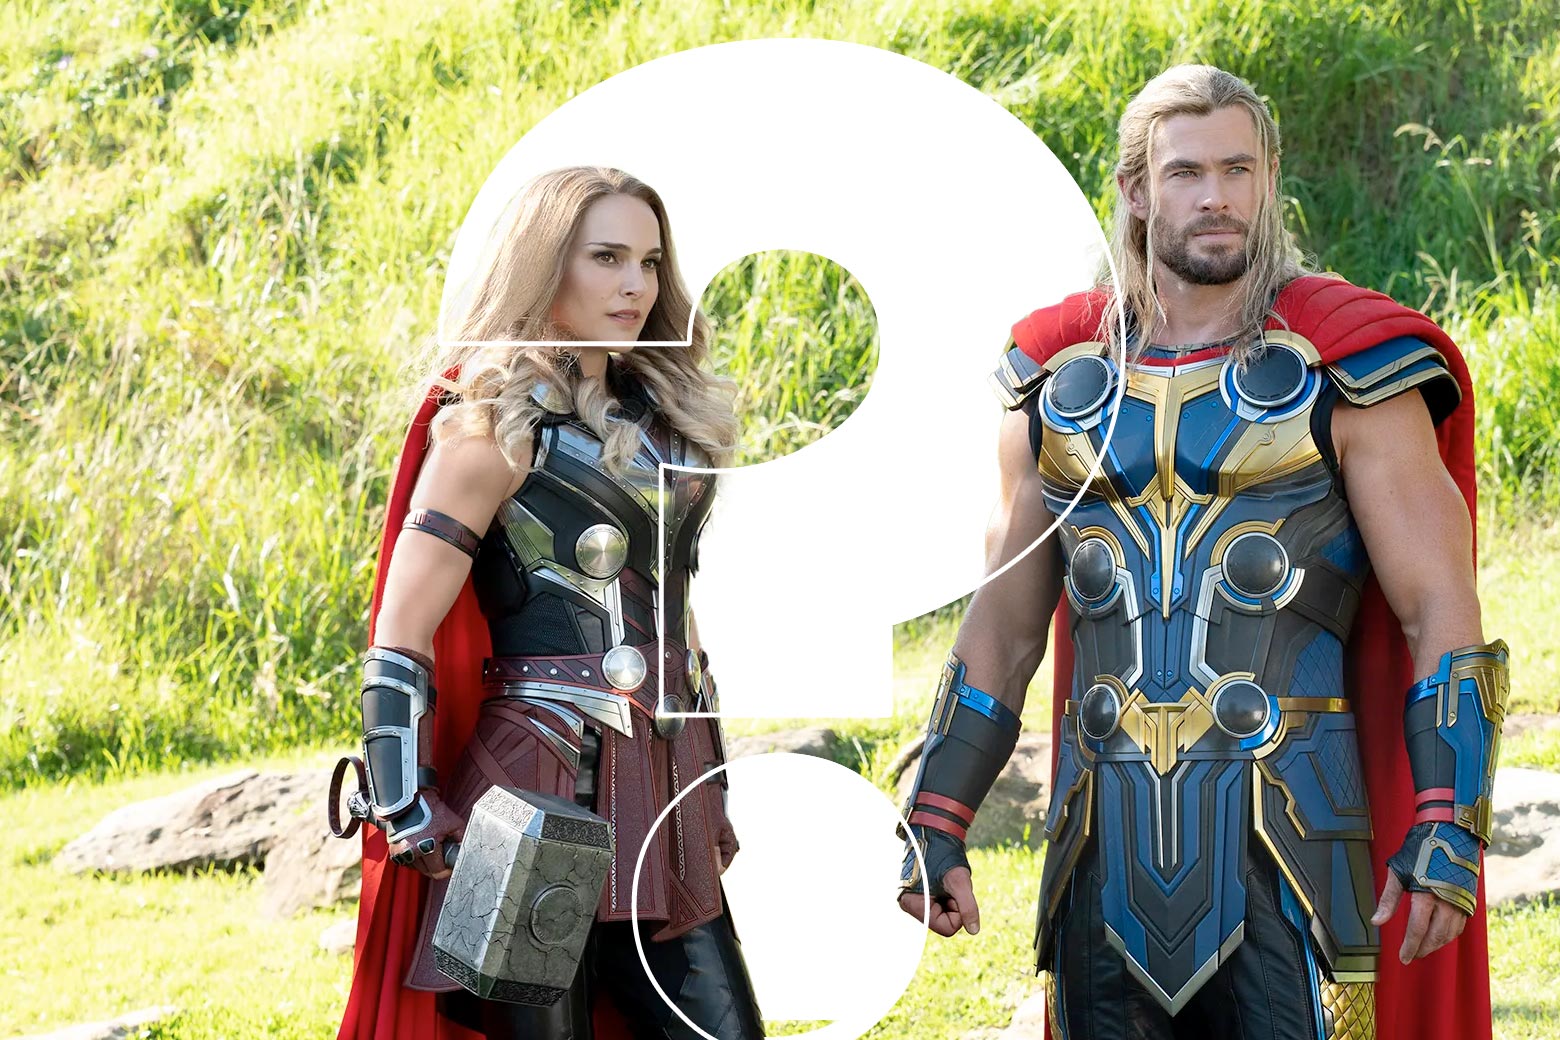 Natalie Portman and Chris Hemsworth standing with a giant white question mark in between the two